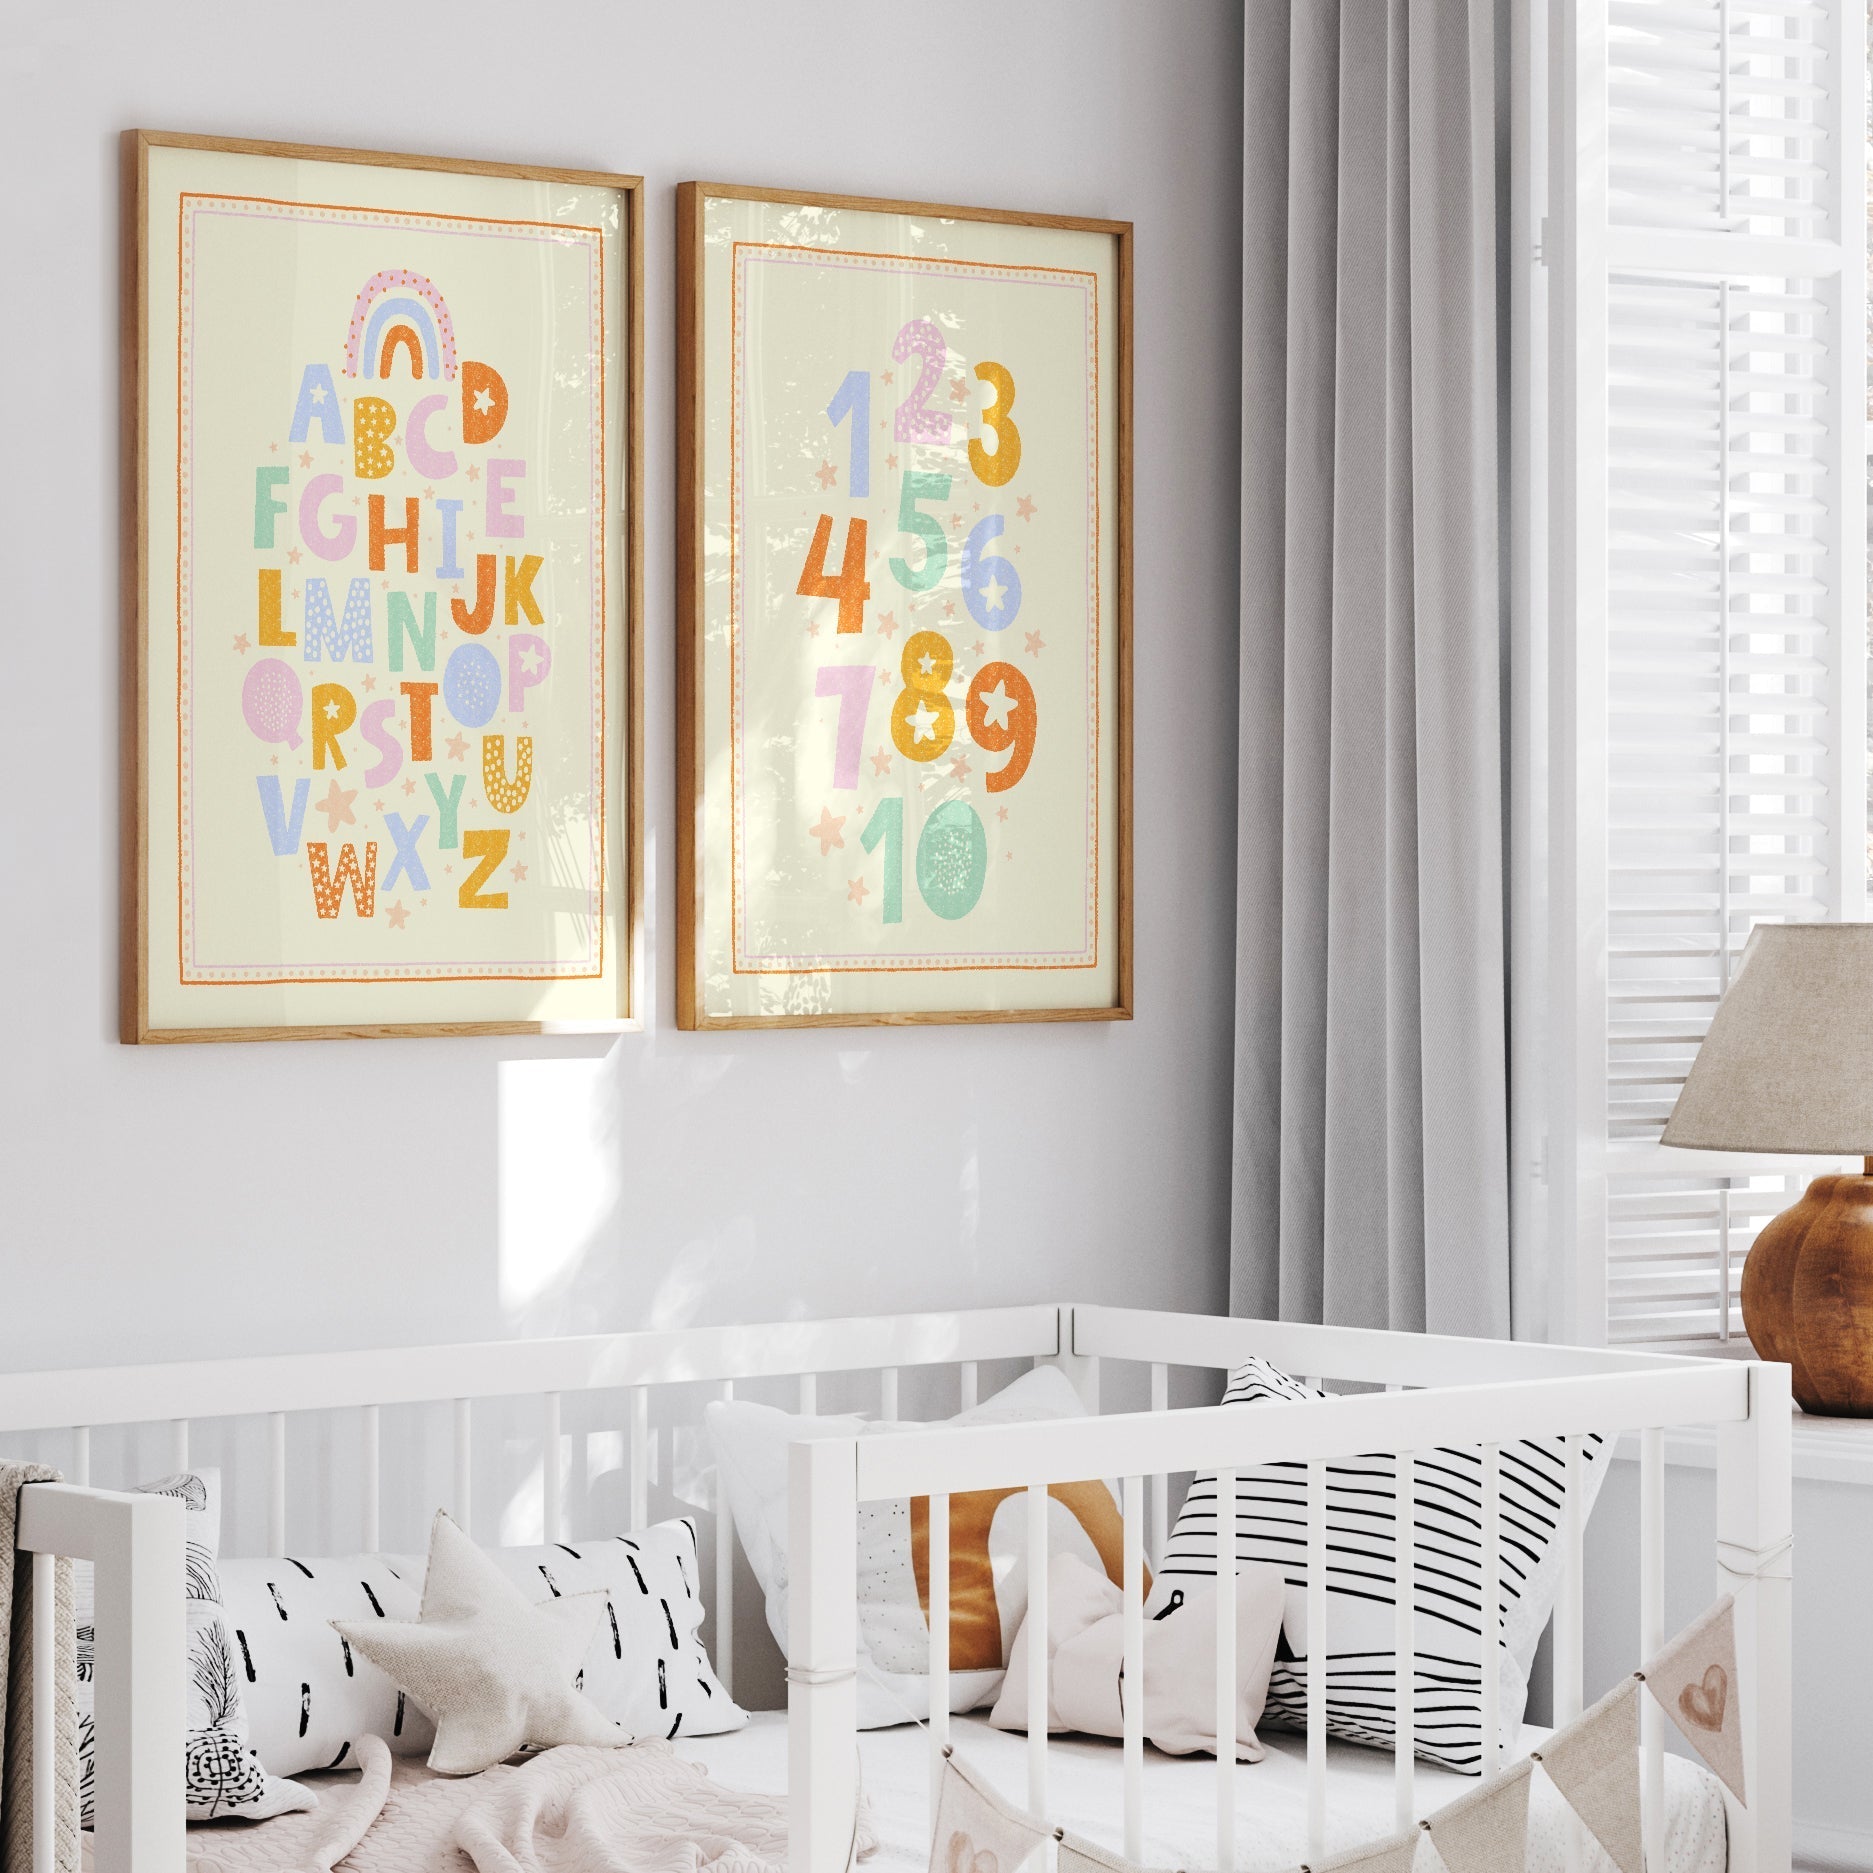 Set of the Boho Alphabet Print and Boho Numbers Print Framed hanging on a wall in a well lit childs bedroom